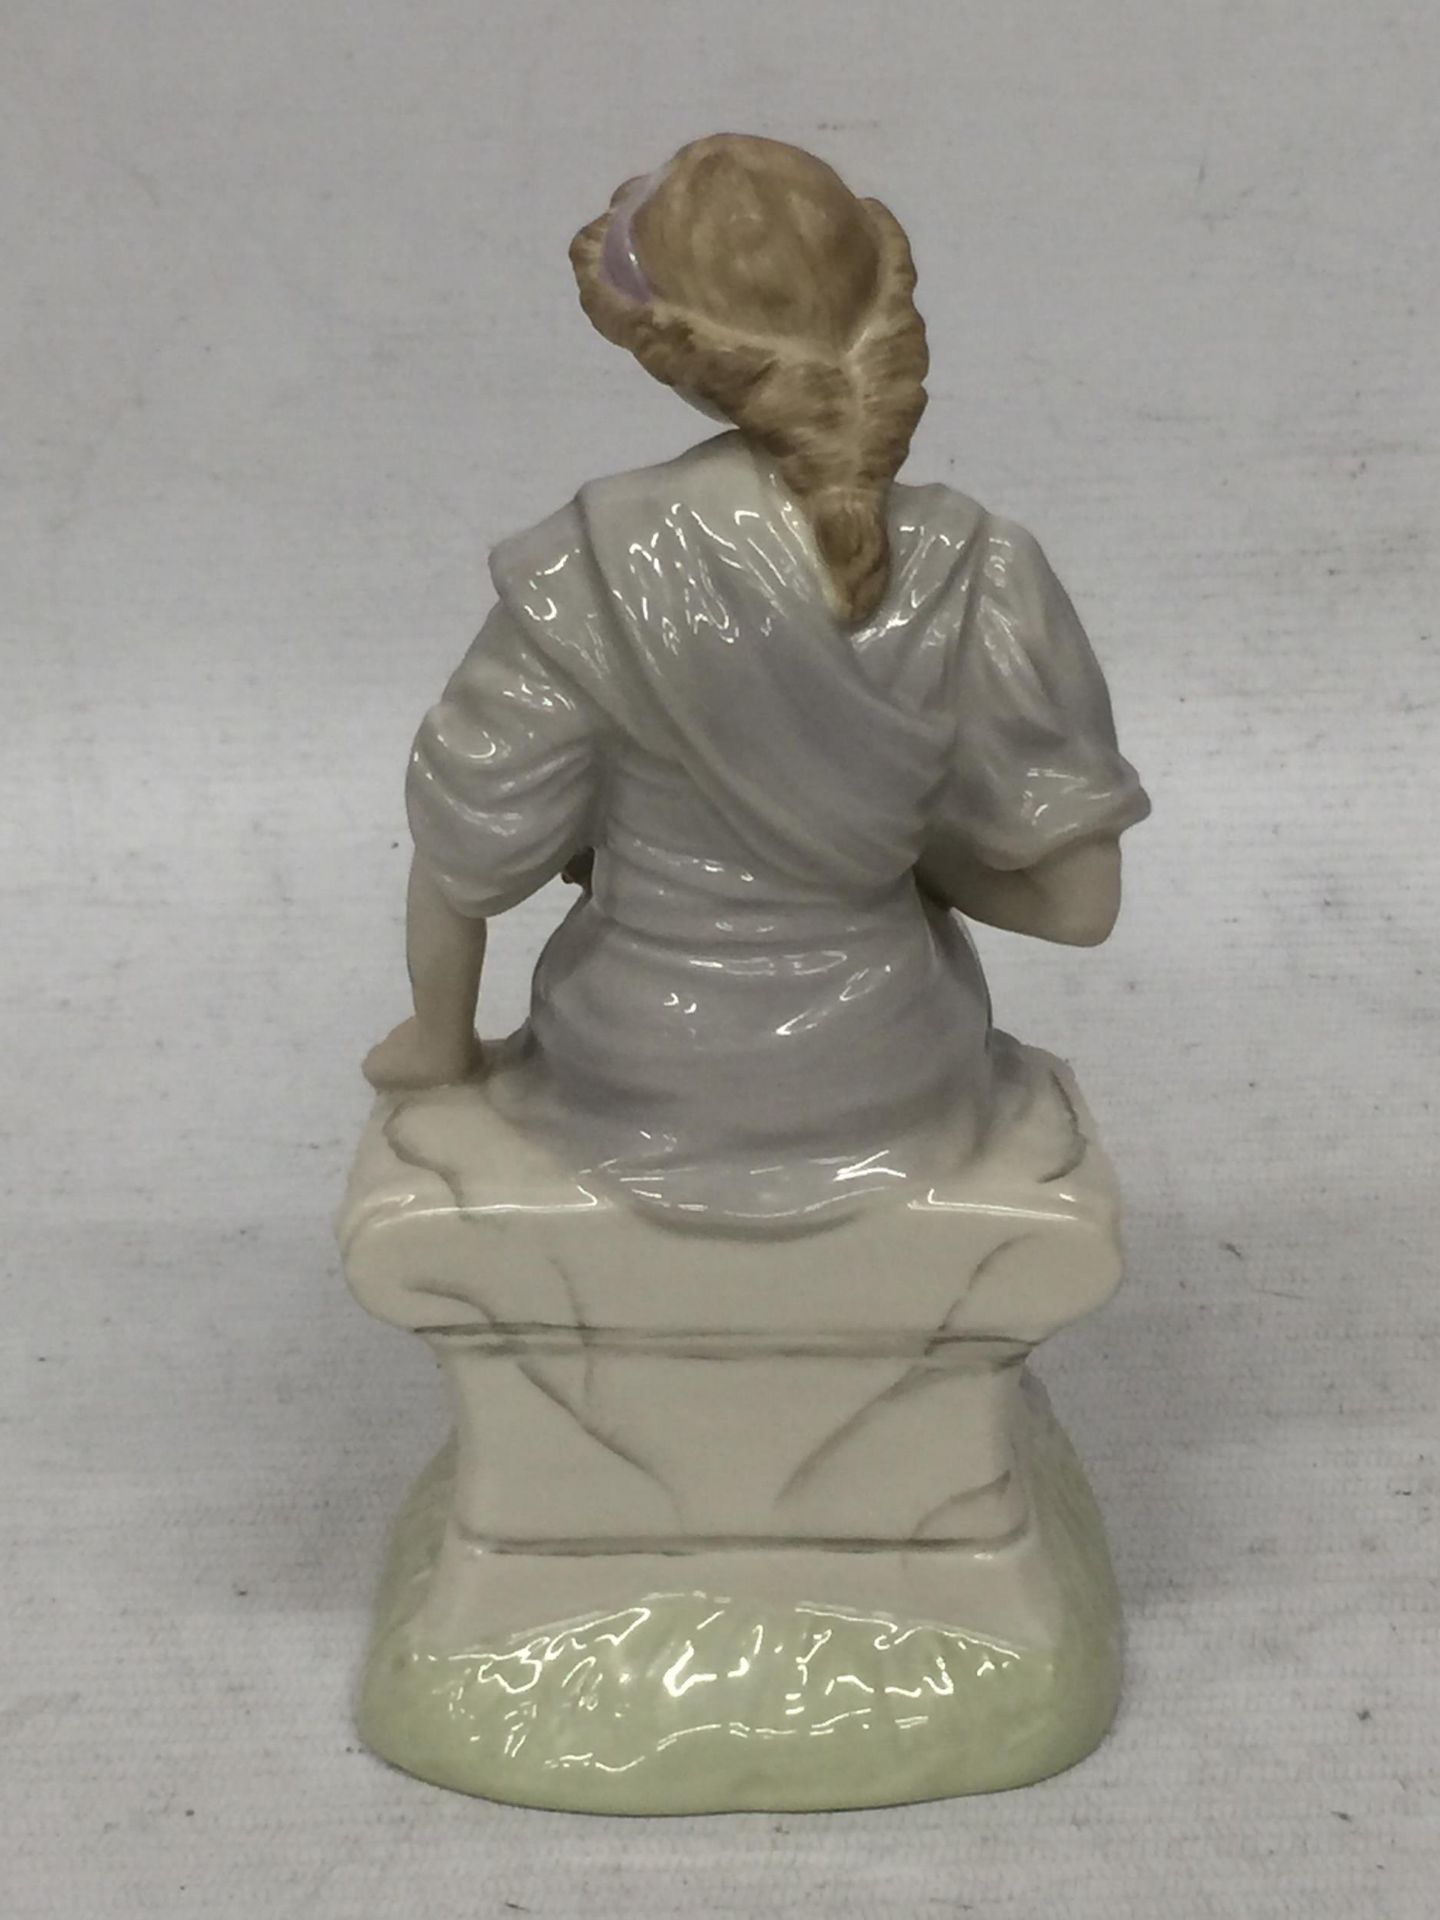 A WEDGWOOD THE CLASSICAL COLLECTION 'TRANQUILITY' FIGURE - Image 3 of 5